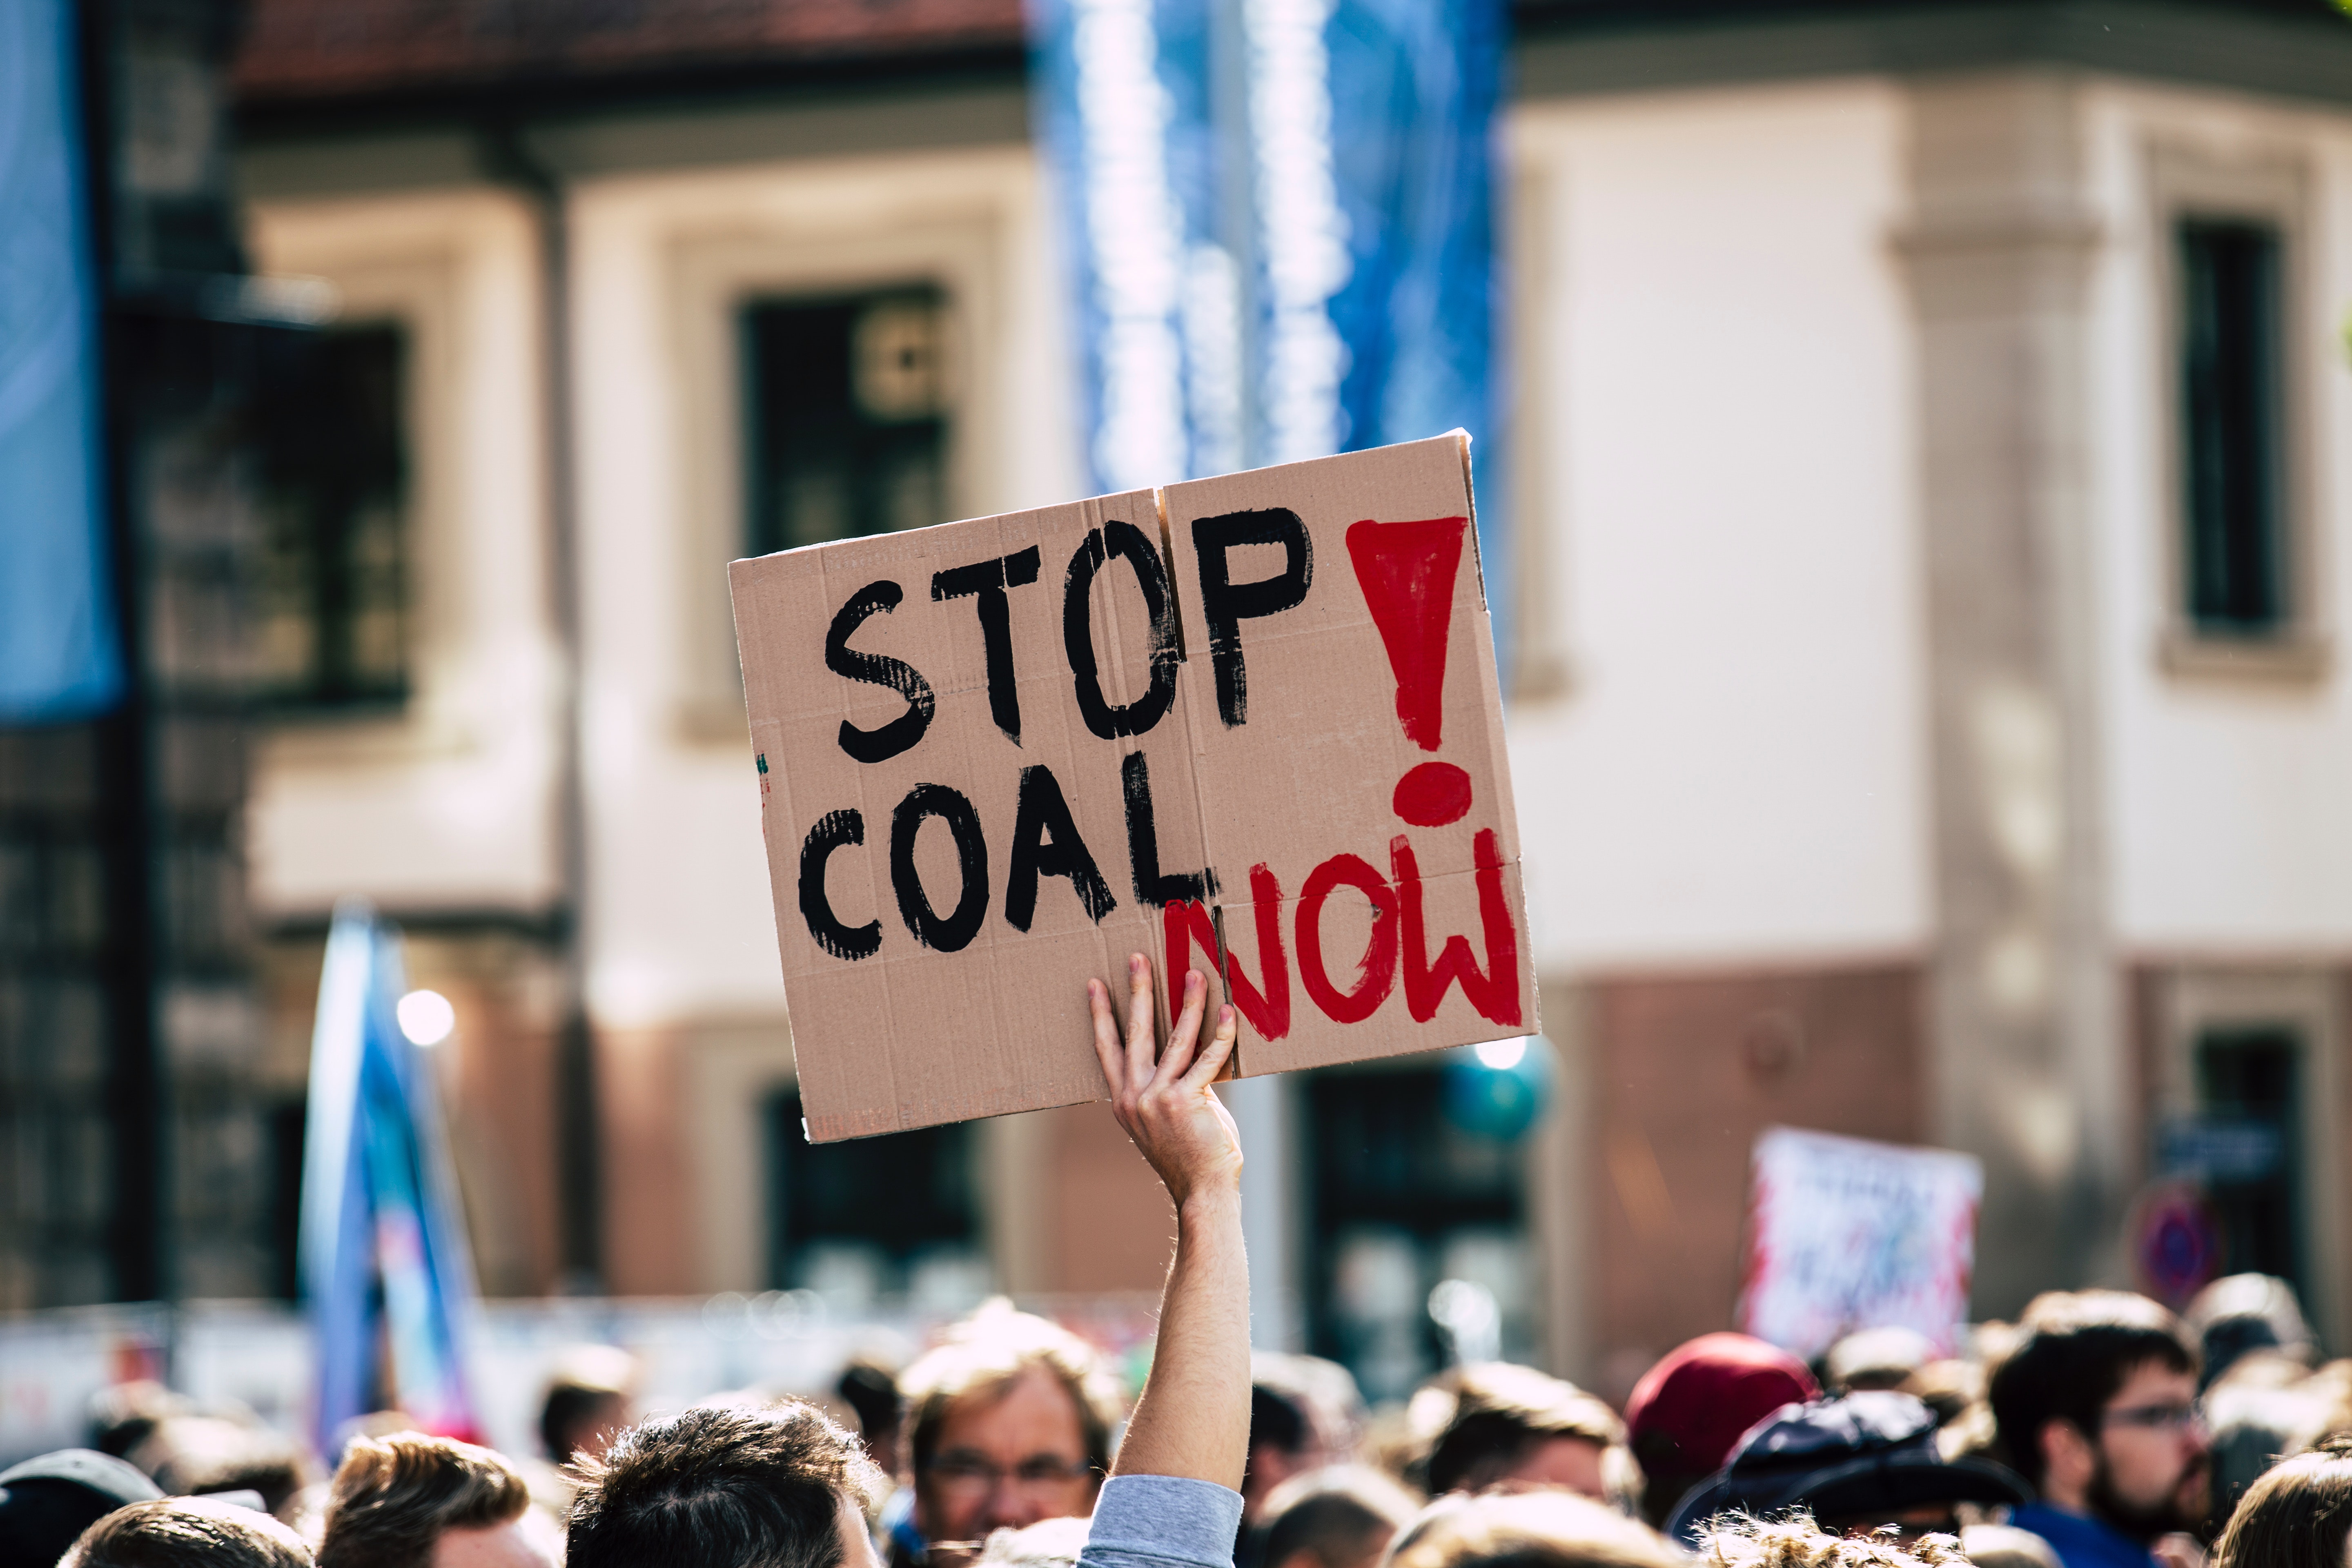 Person in a crowd holding up a hand-painted sign that says “stop coal now!”